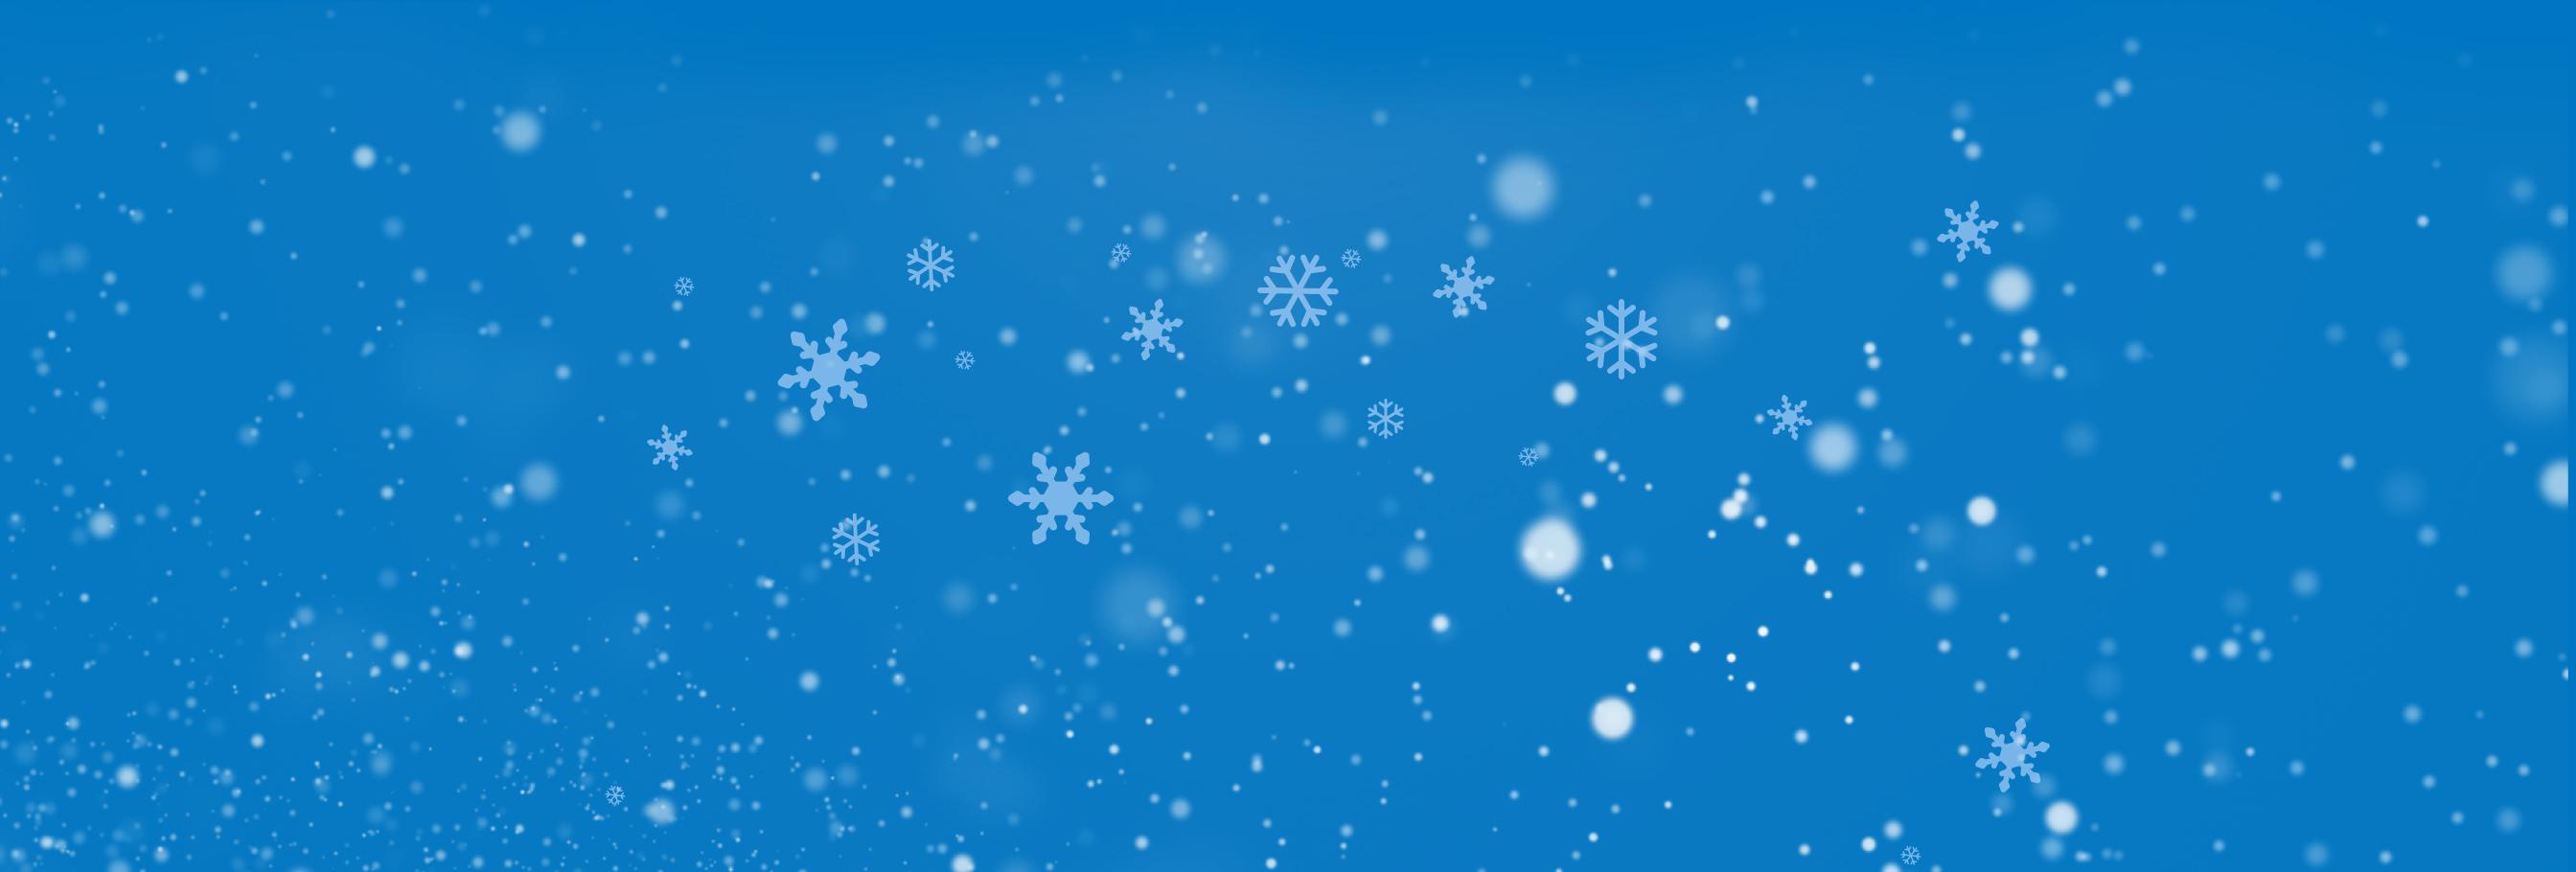 Winter glow footer dreaming background